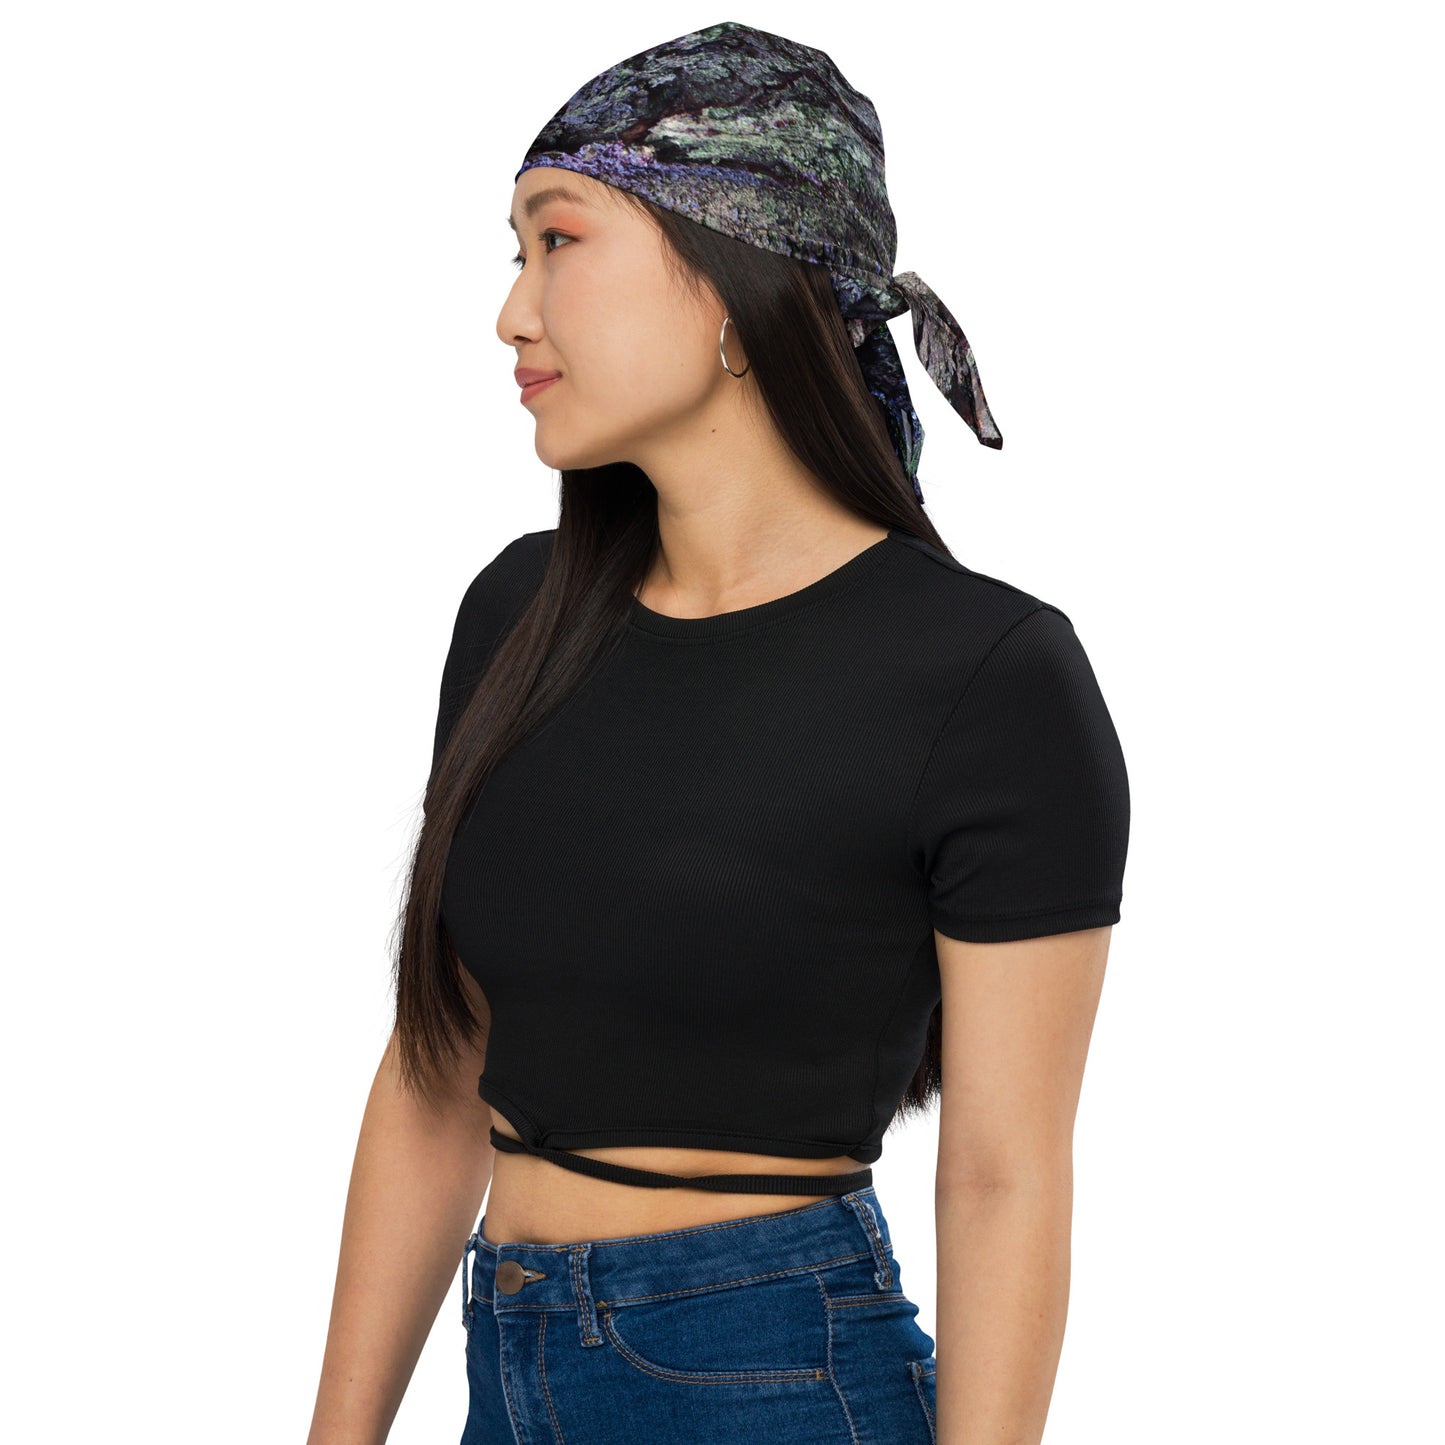 All-over print bandana—By Barked